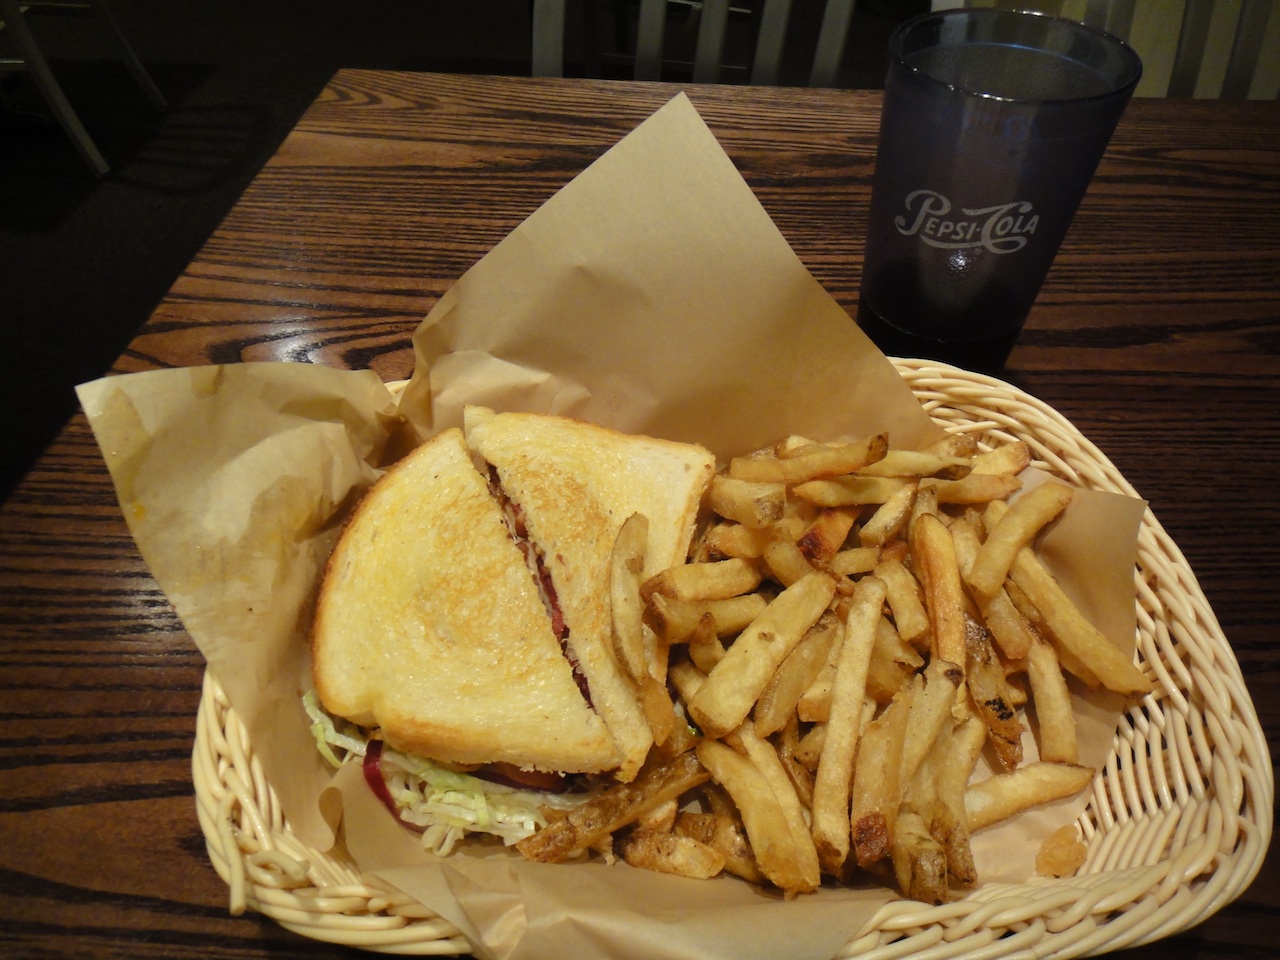 Armadillo Willy's: Turkey Bacon Stack + side of Fresh-cut Fries